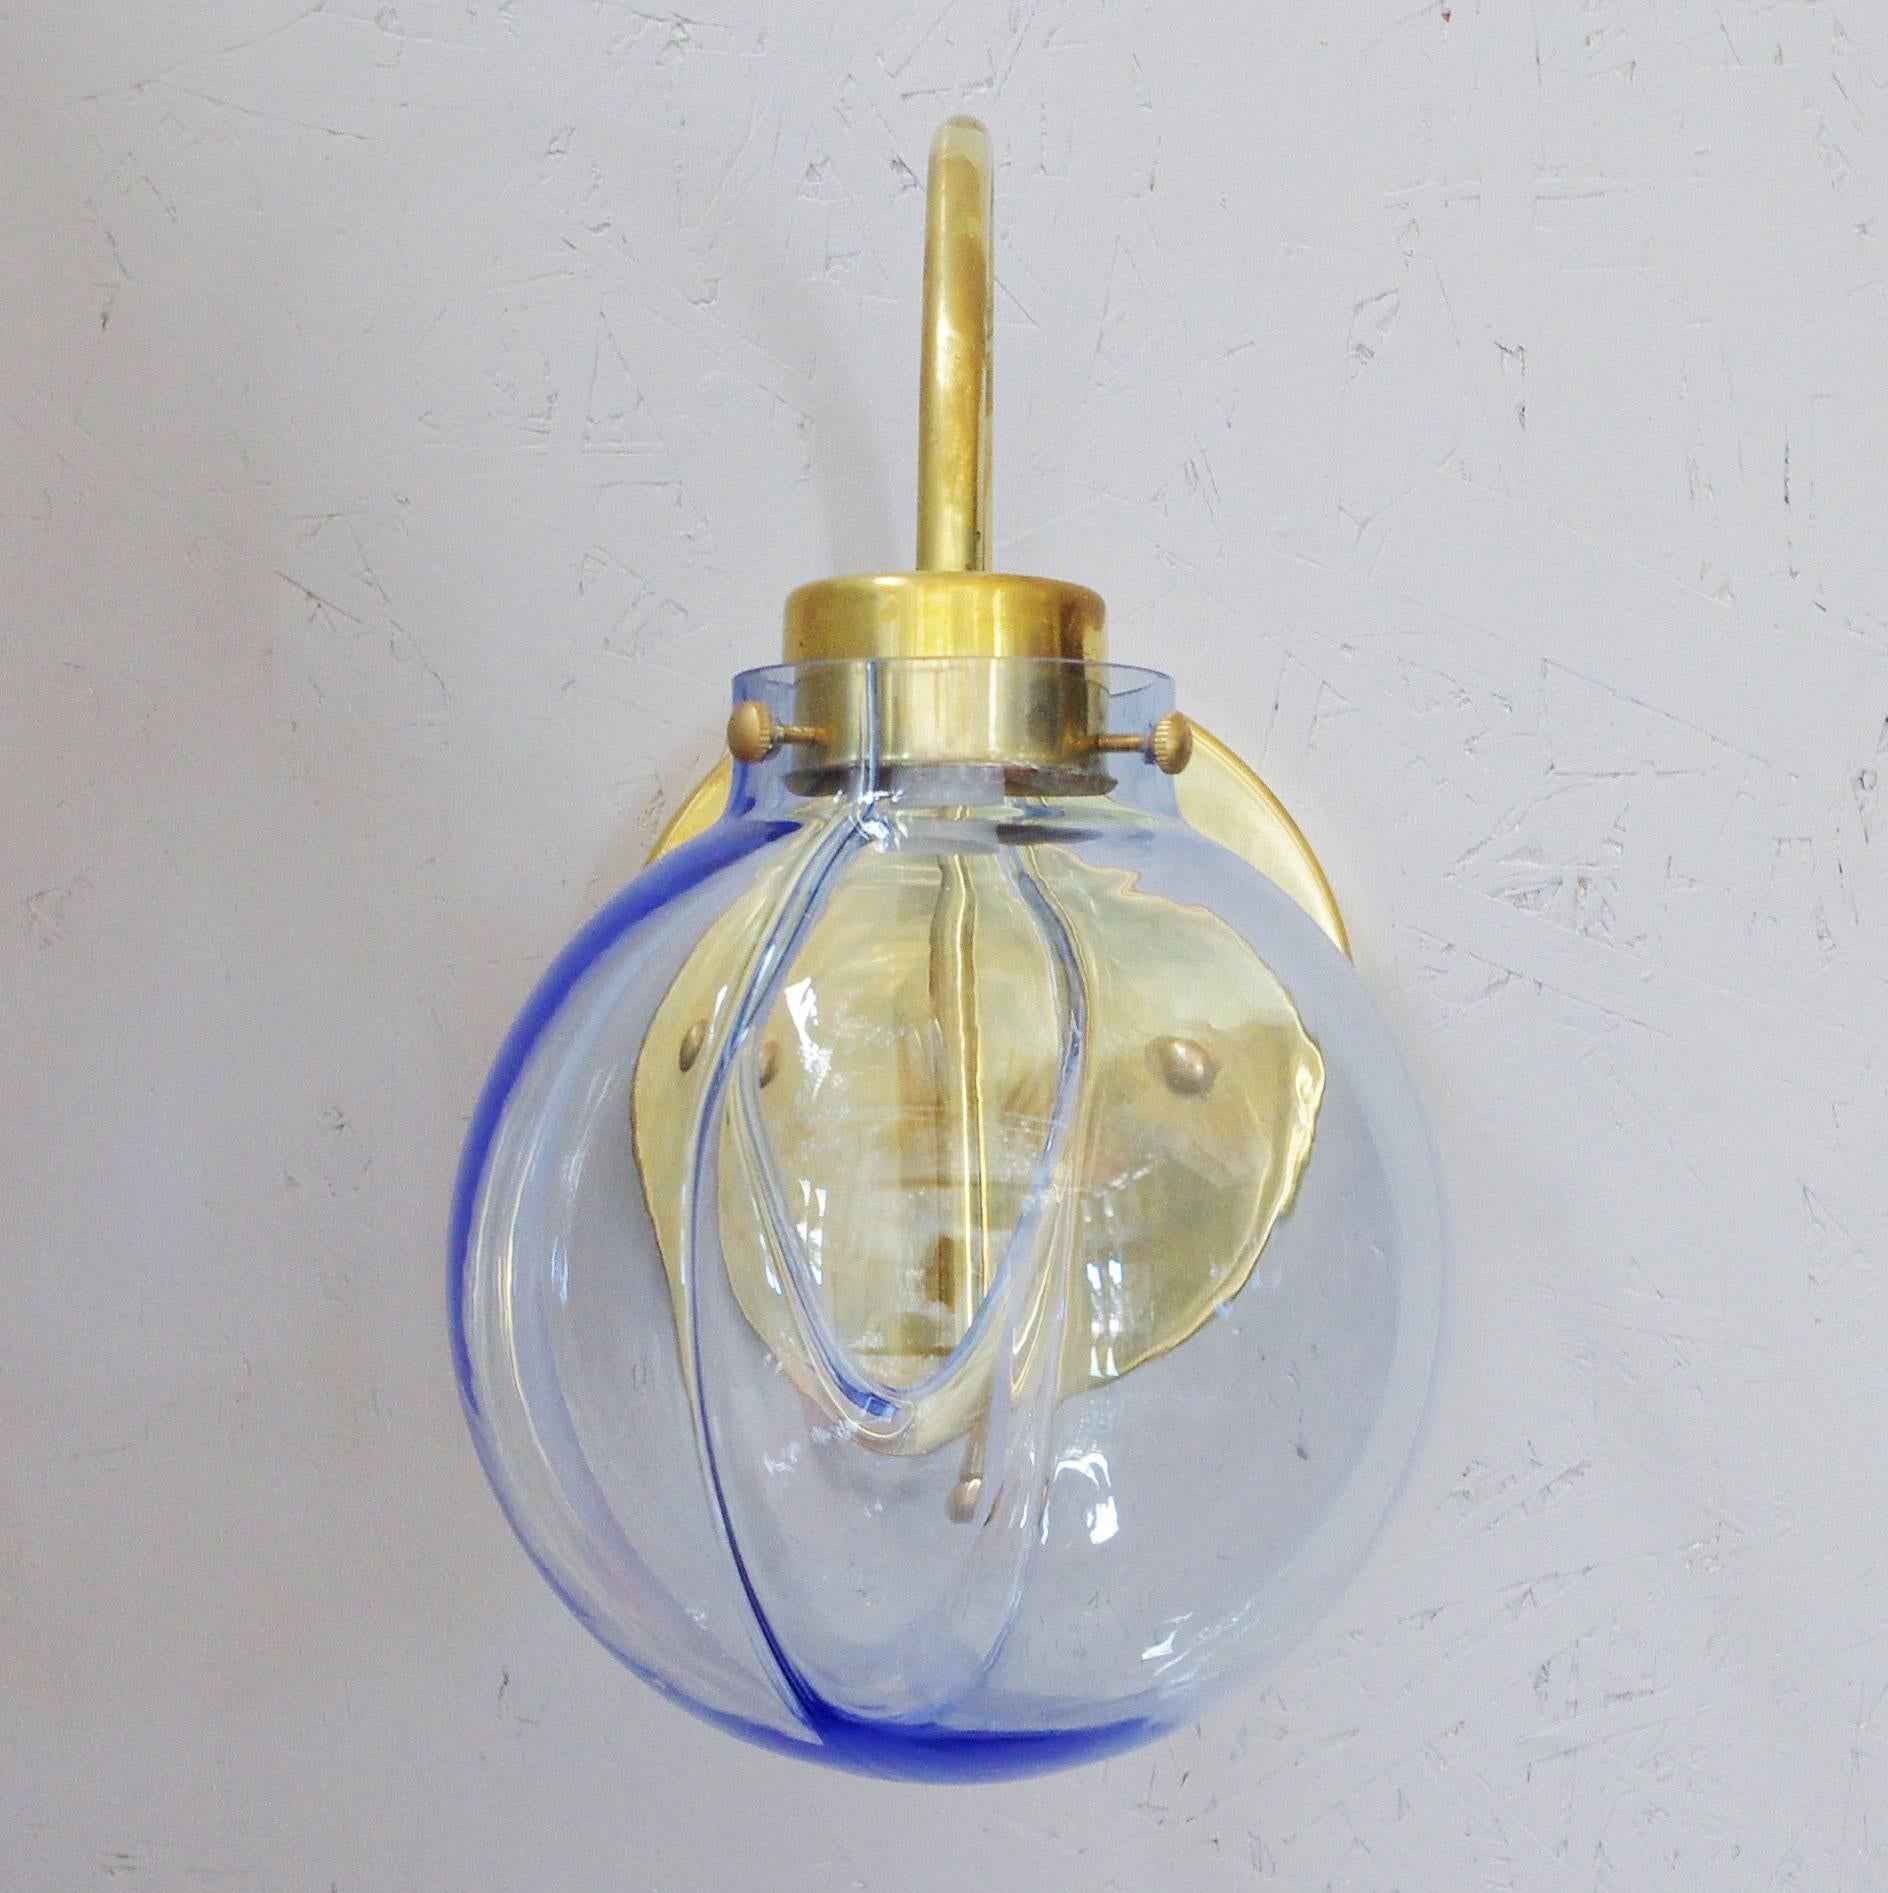 Mid Century Italian single sconce designed by Toni Zuccheri for Venini with a blue Murano glass membrane globe mounted on brass arm and backplate / Made in Italy in the 1960s
1 light / E26 or E27 type / max 40W
Height: 13 inches / Width: 7.5 inches